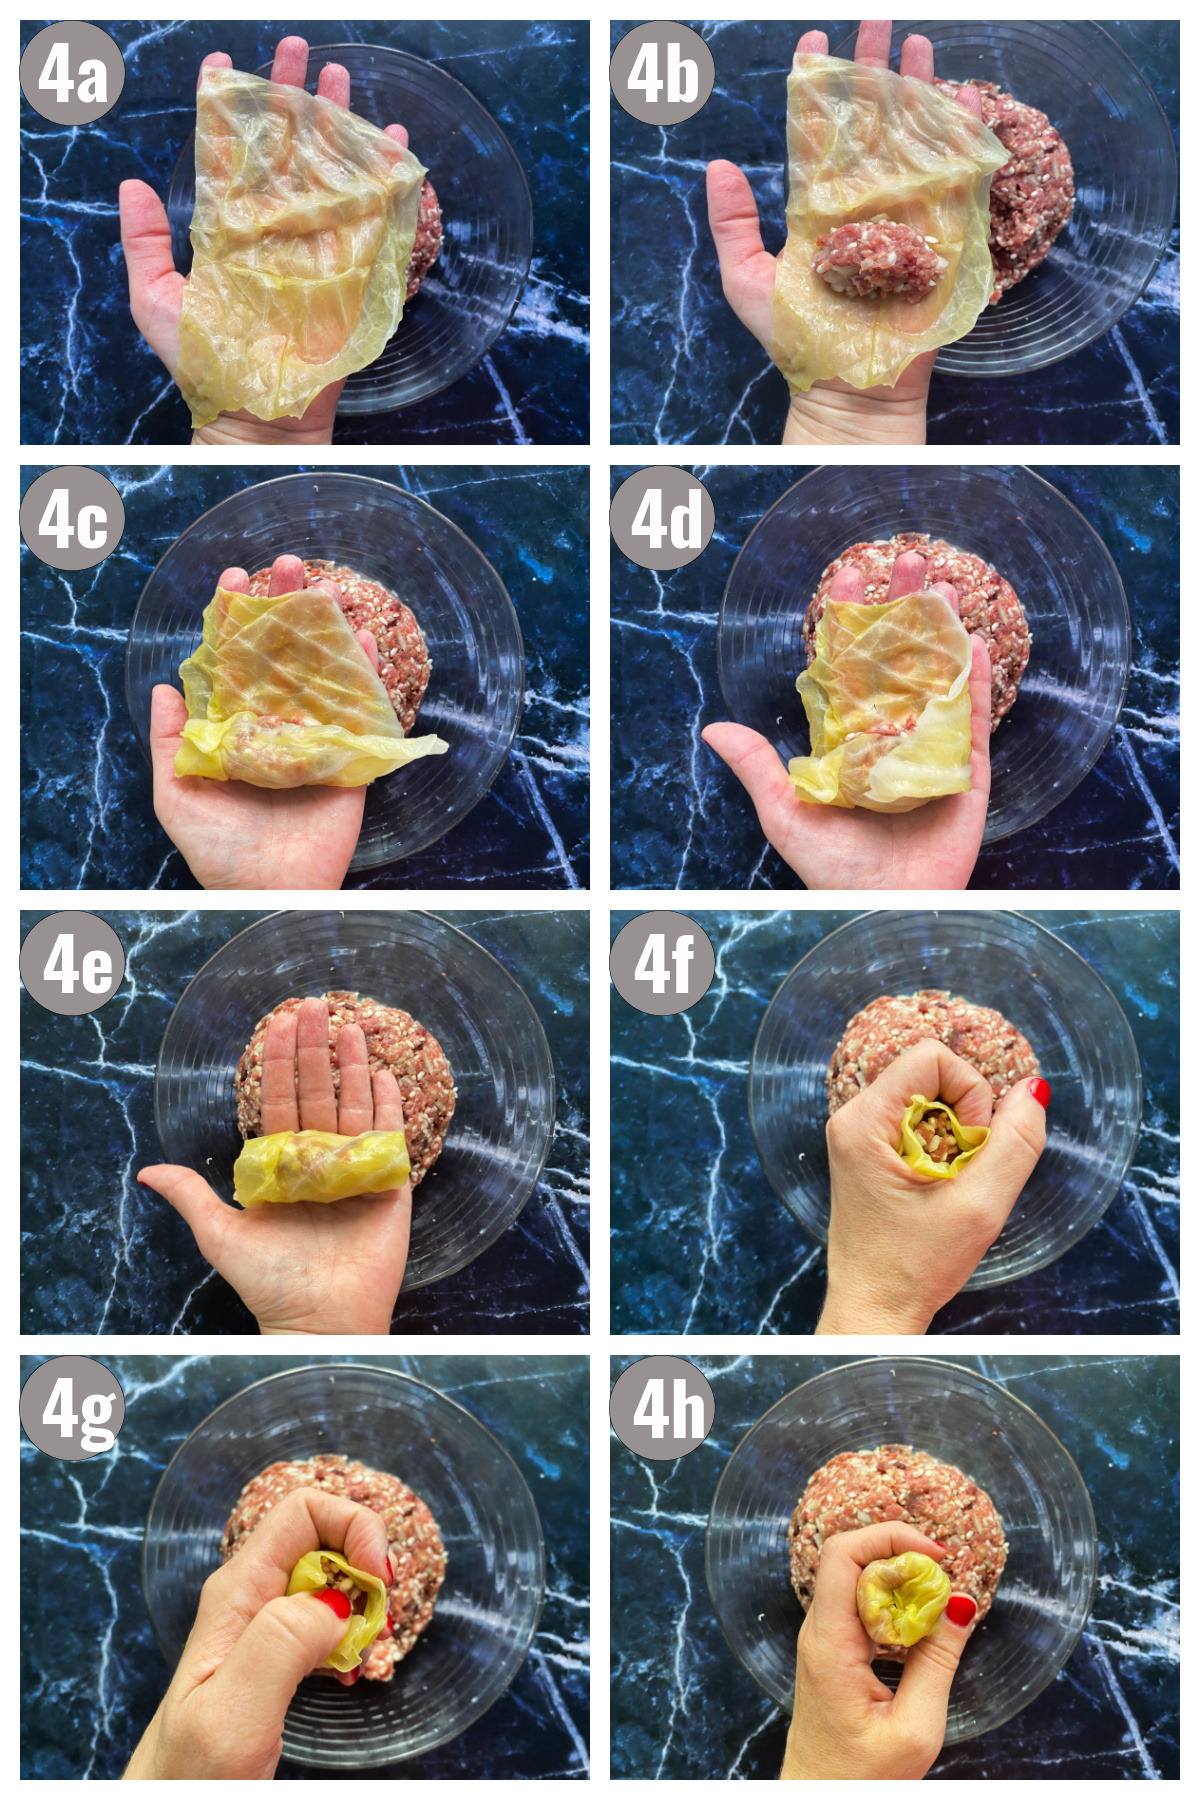 Eight photographs of a hand with a cabbage leaf and stuffing (instructions how to stuffed cabbage).